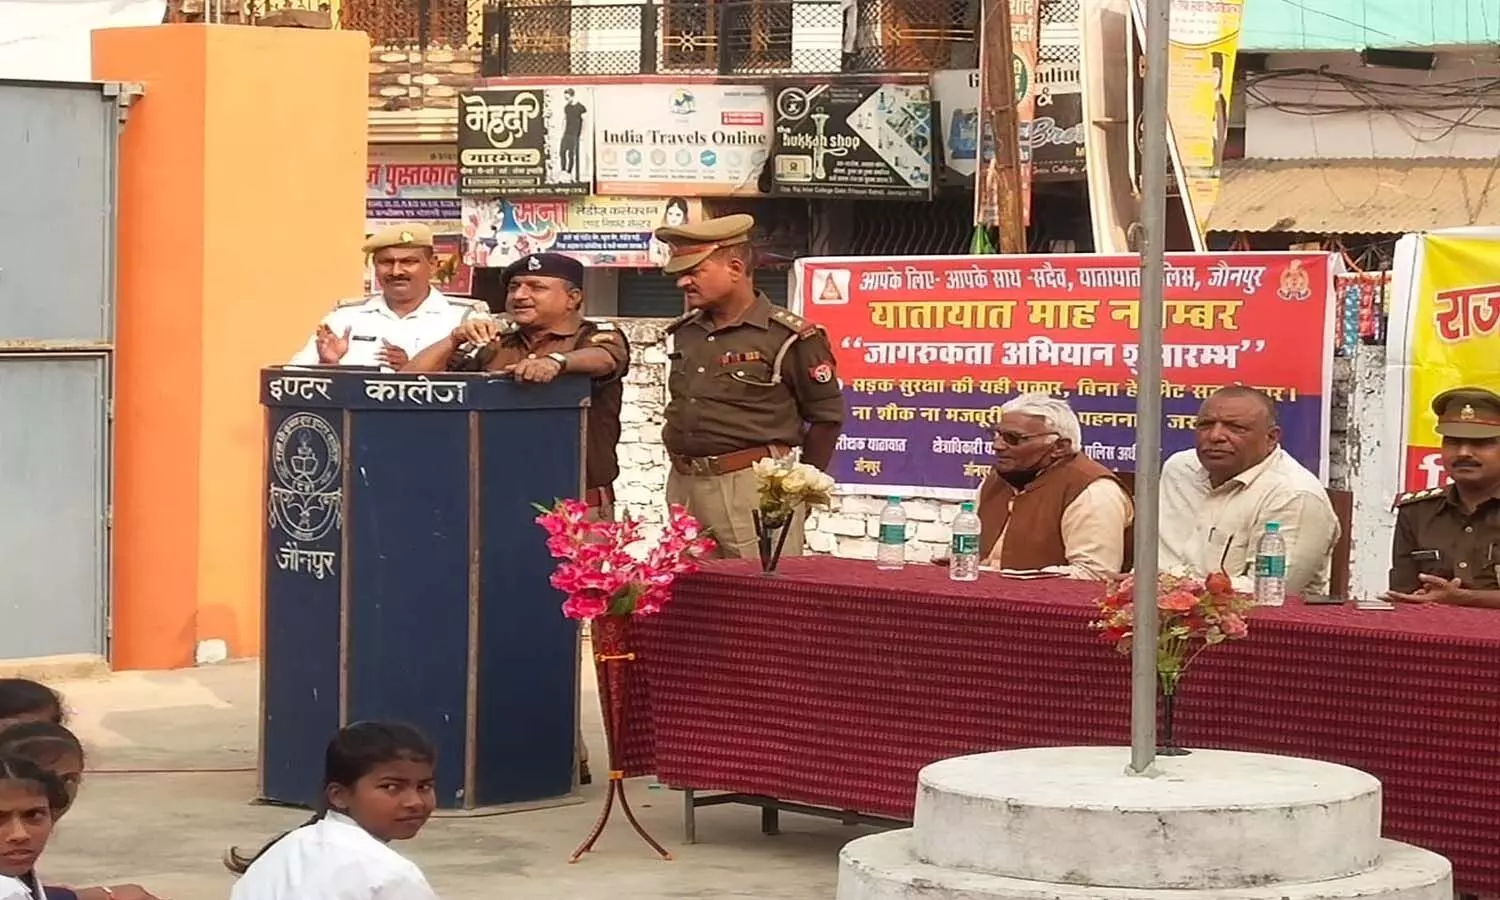 Jaunpur News: There is a provision of punishment in the law for not following the traffic rules- Jitendra Dubey CO City